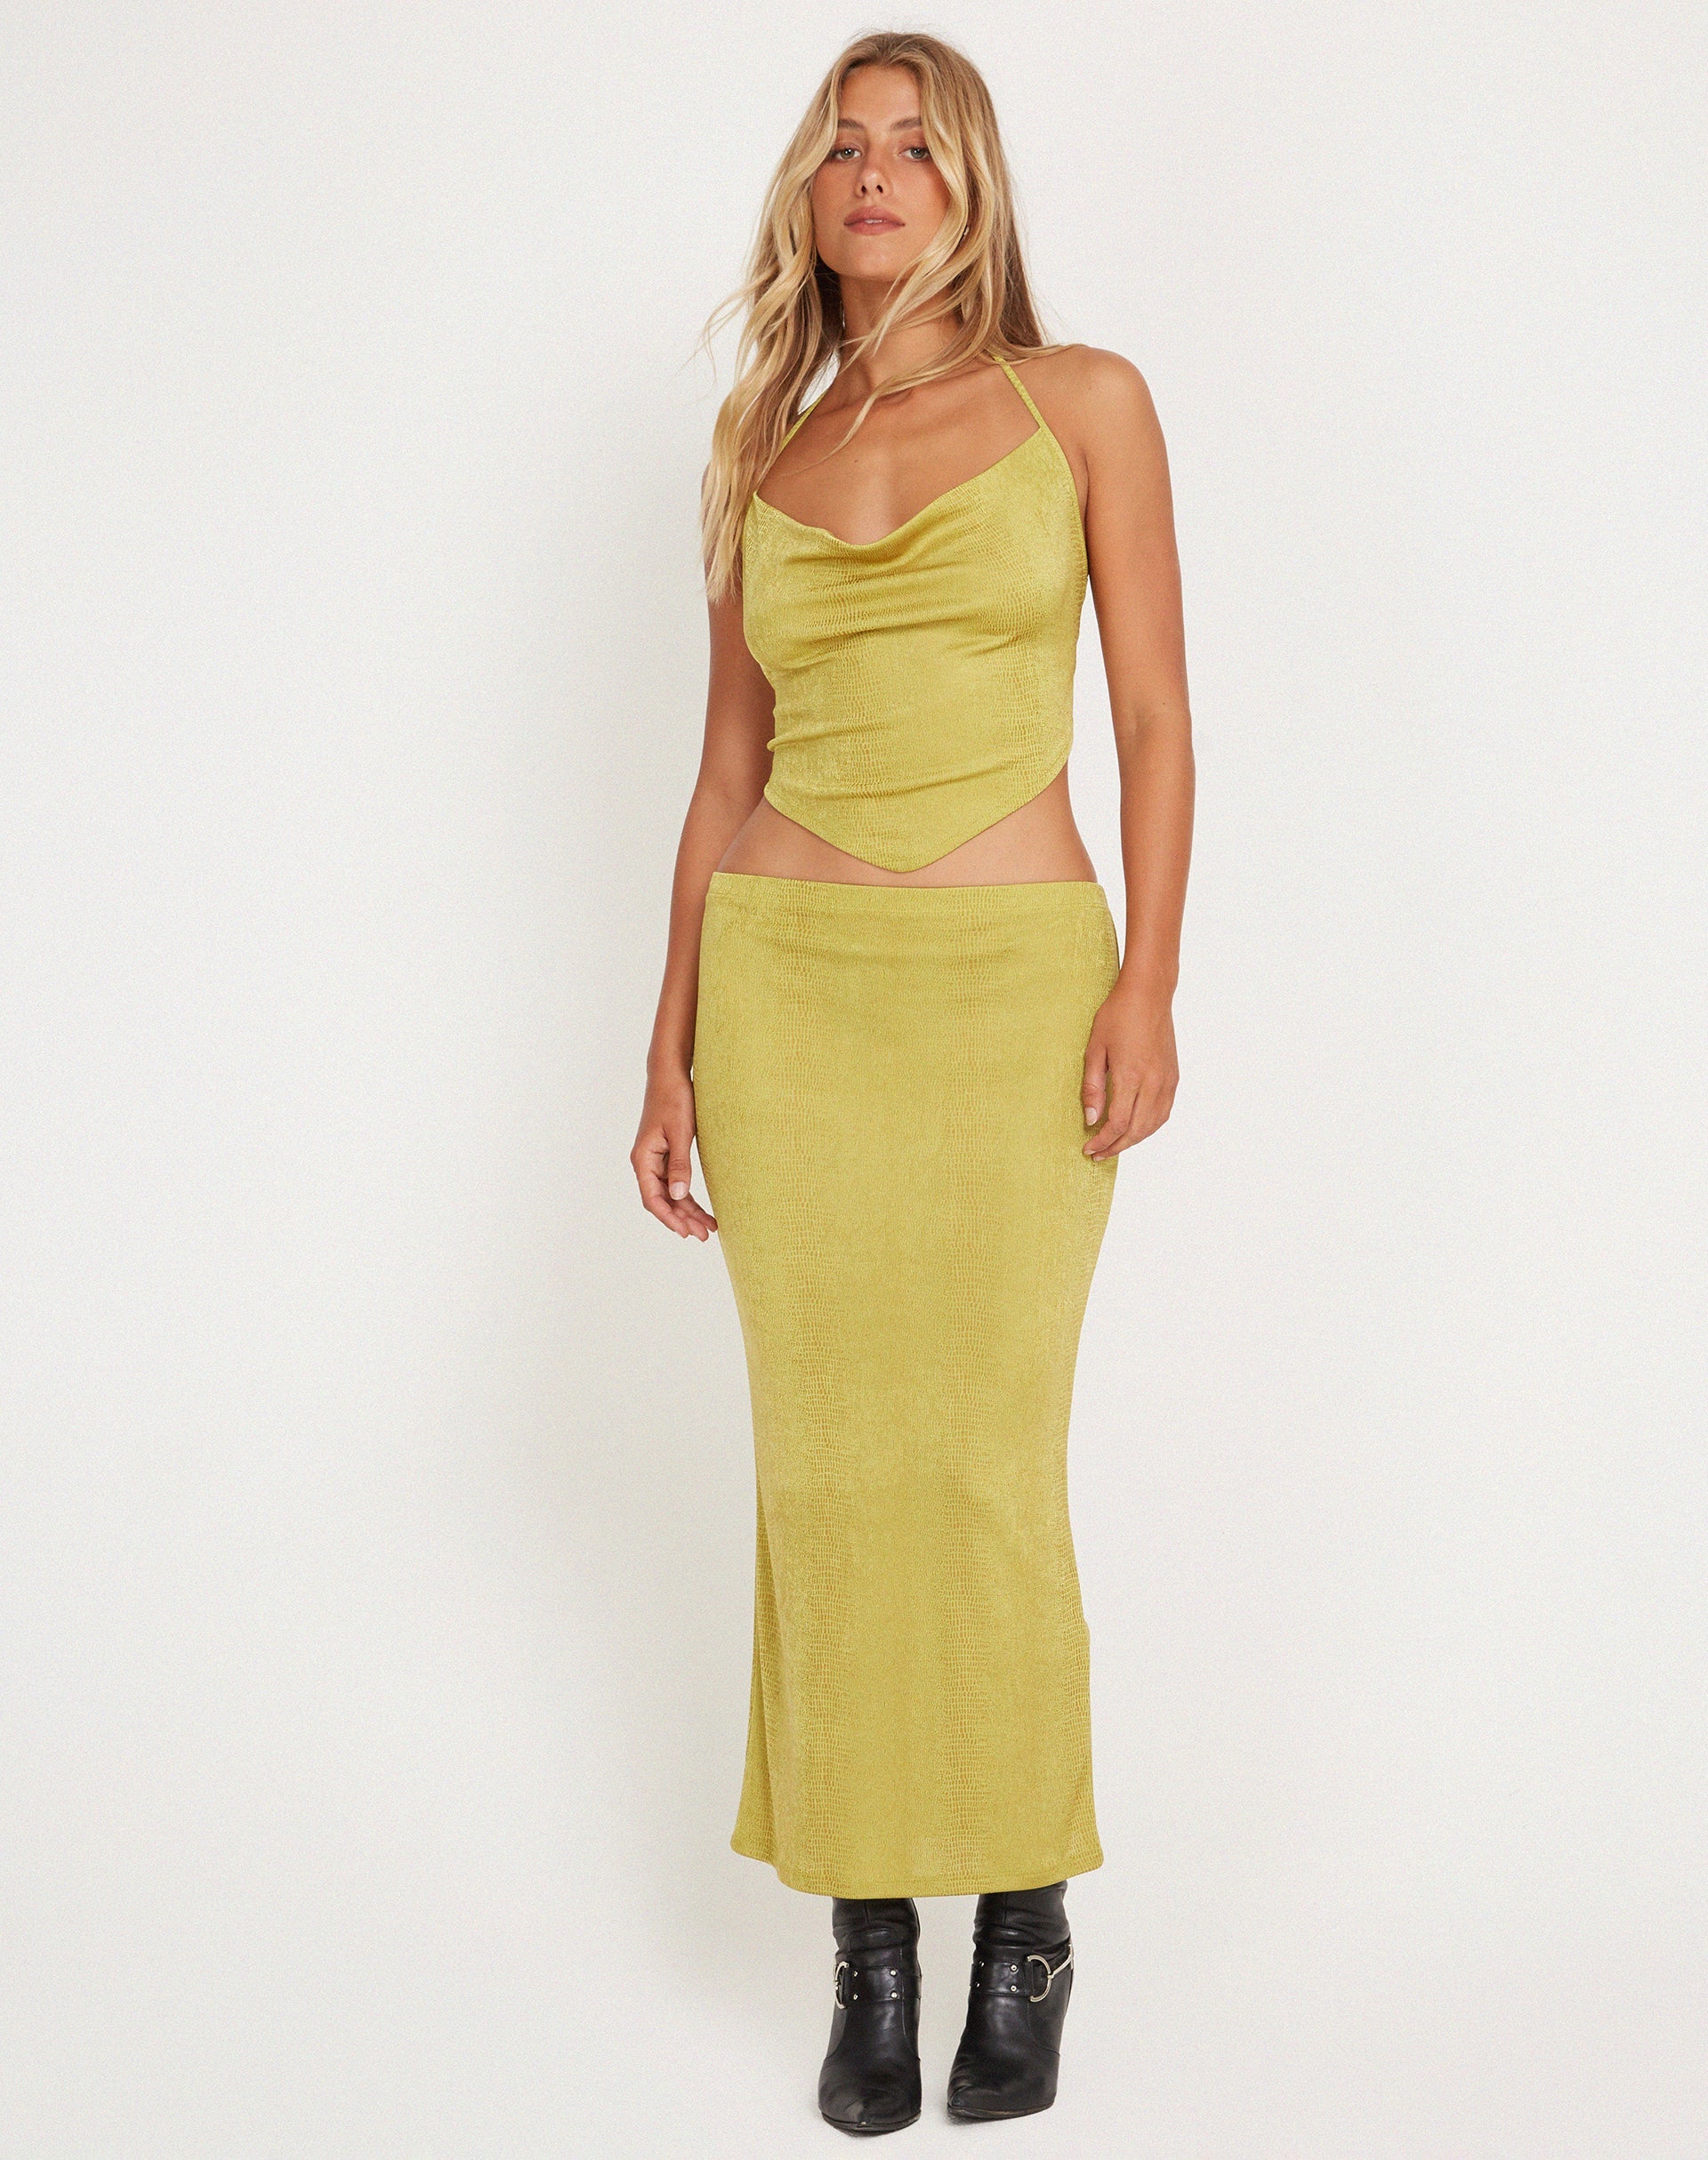 image of Tulus Maxi Skirt in Green Moss